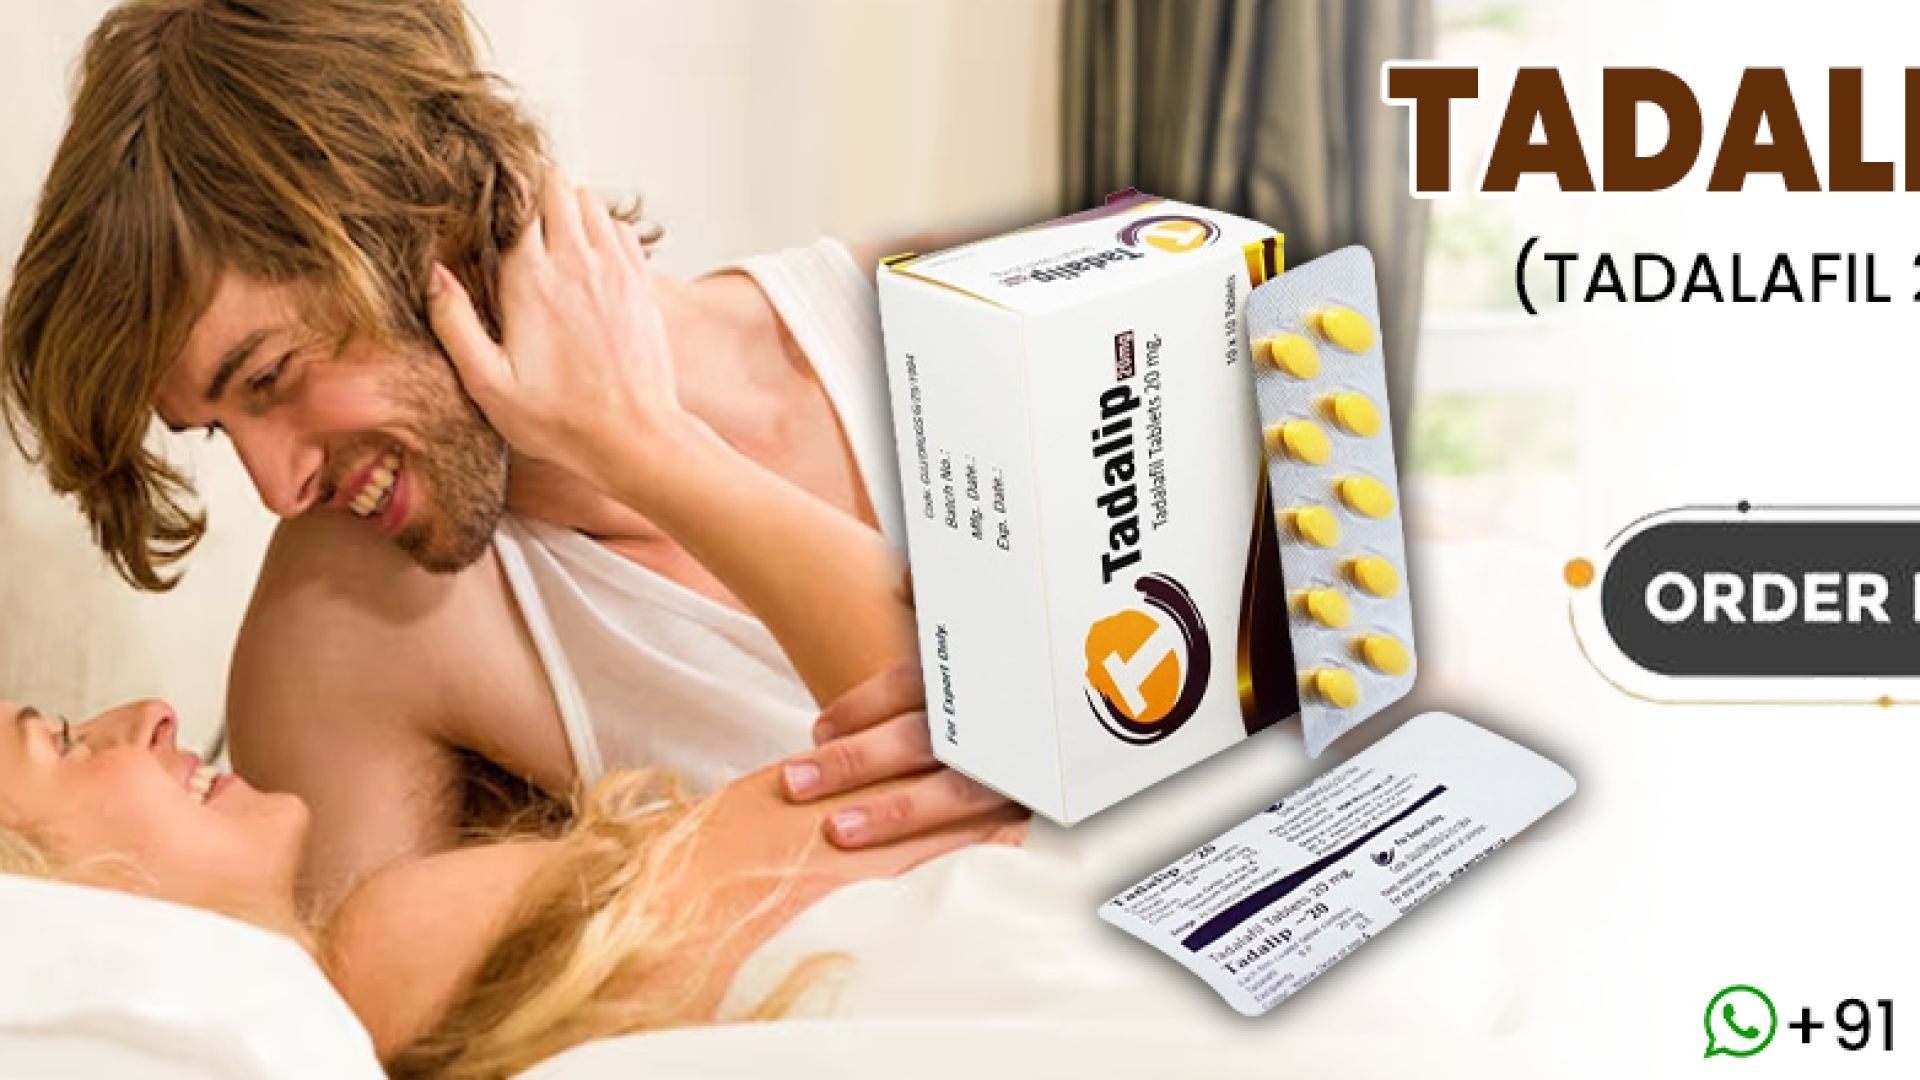 An Oral Medication to Manage Erection Failure With Tadalip 20mg